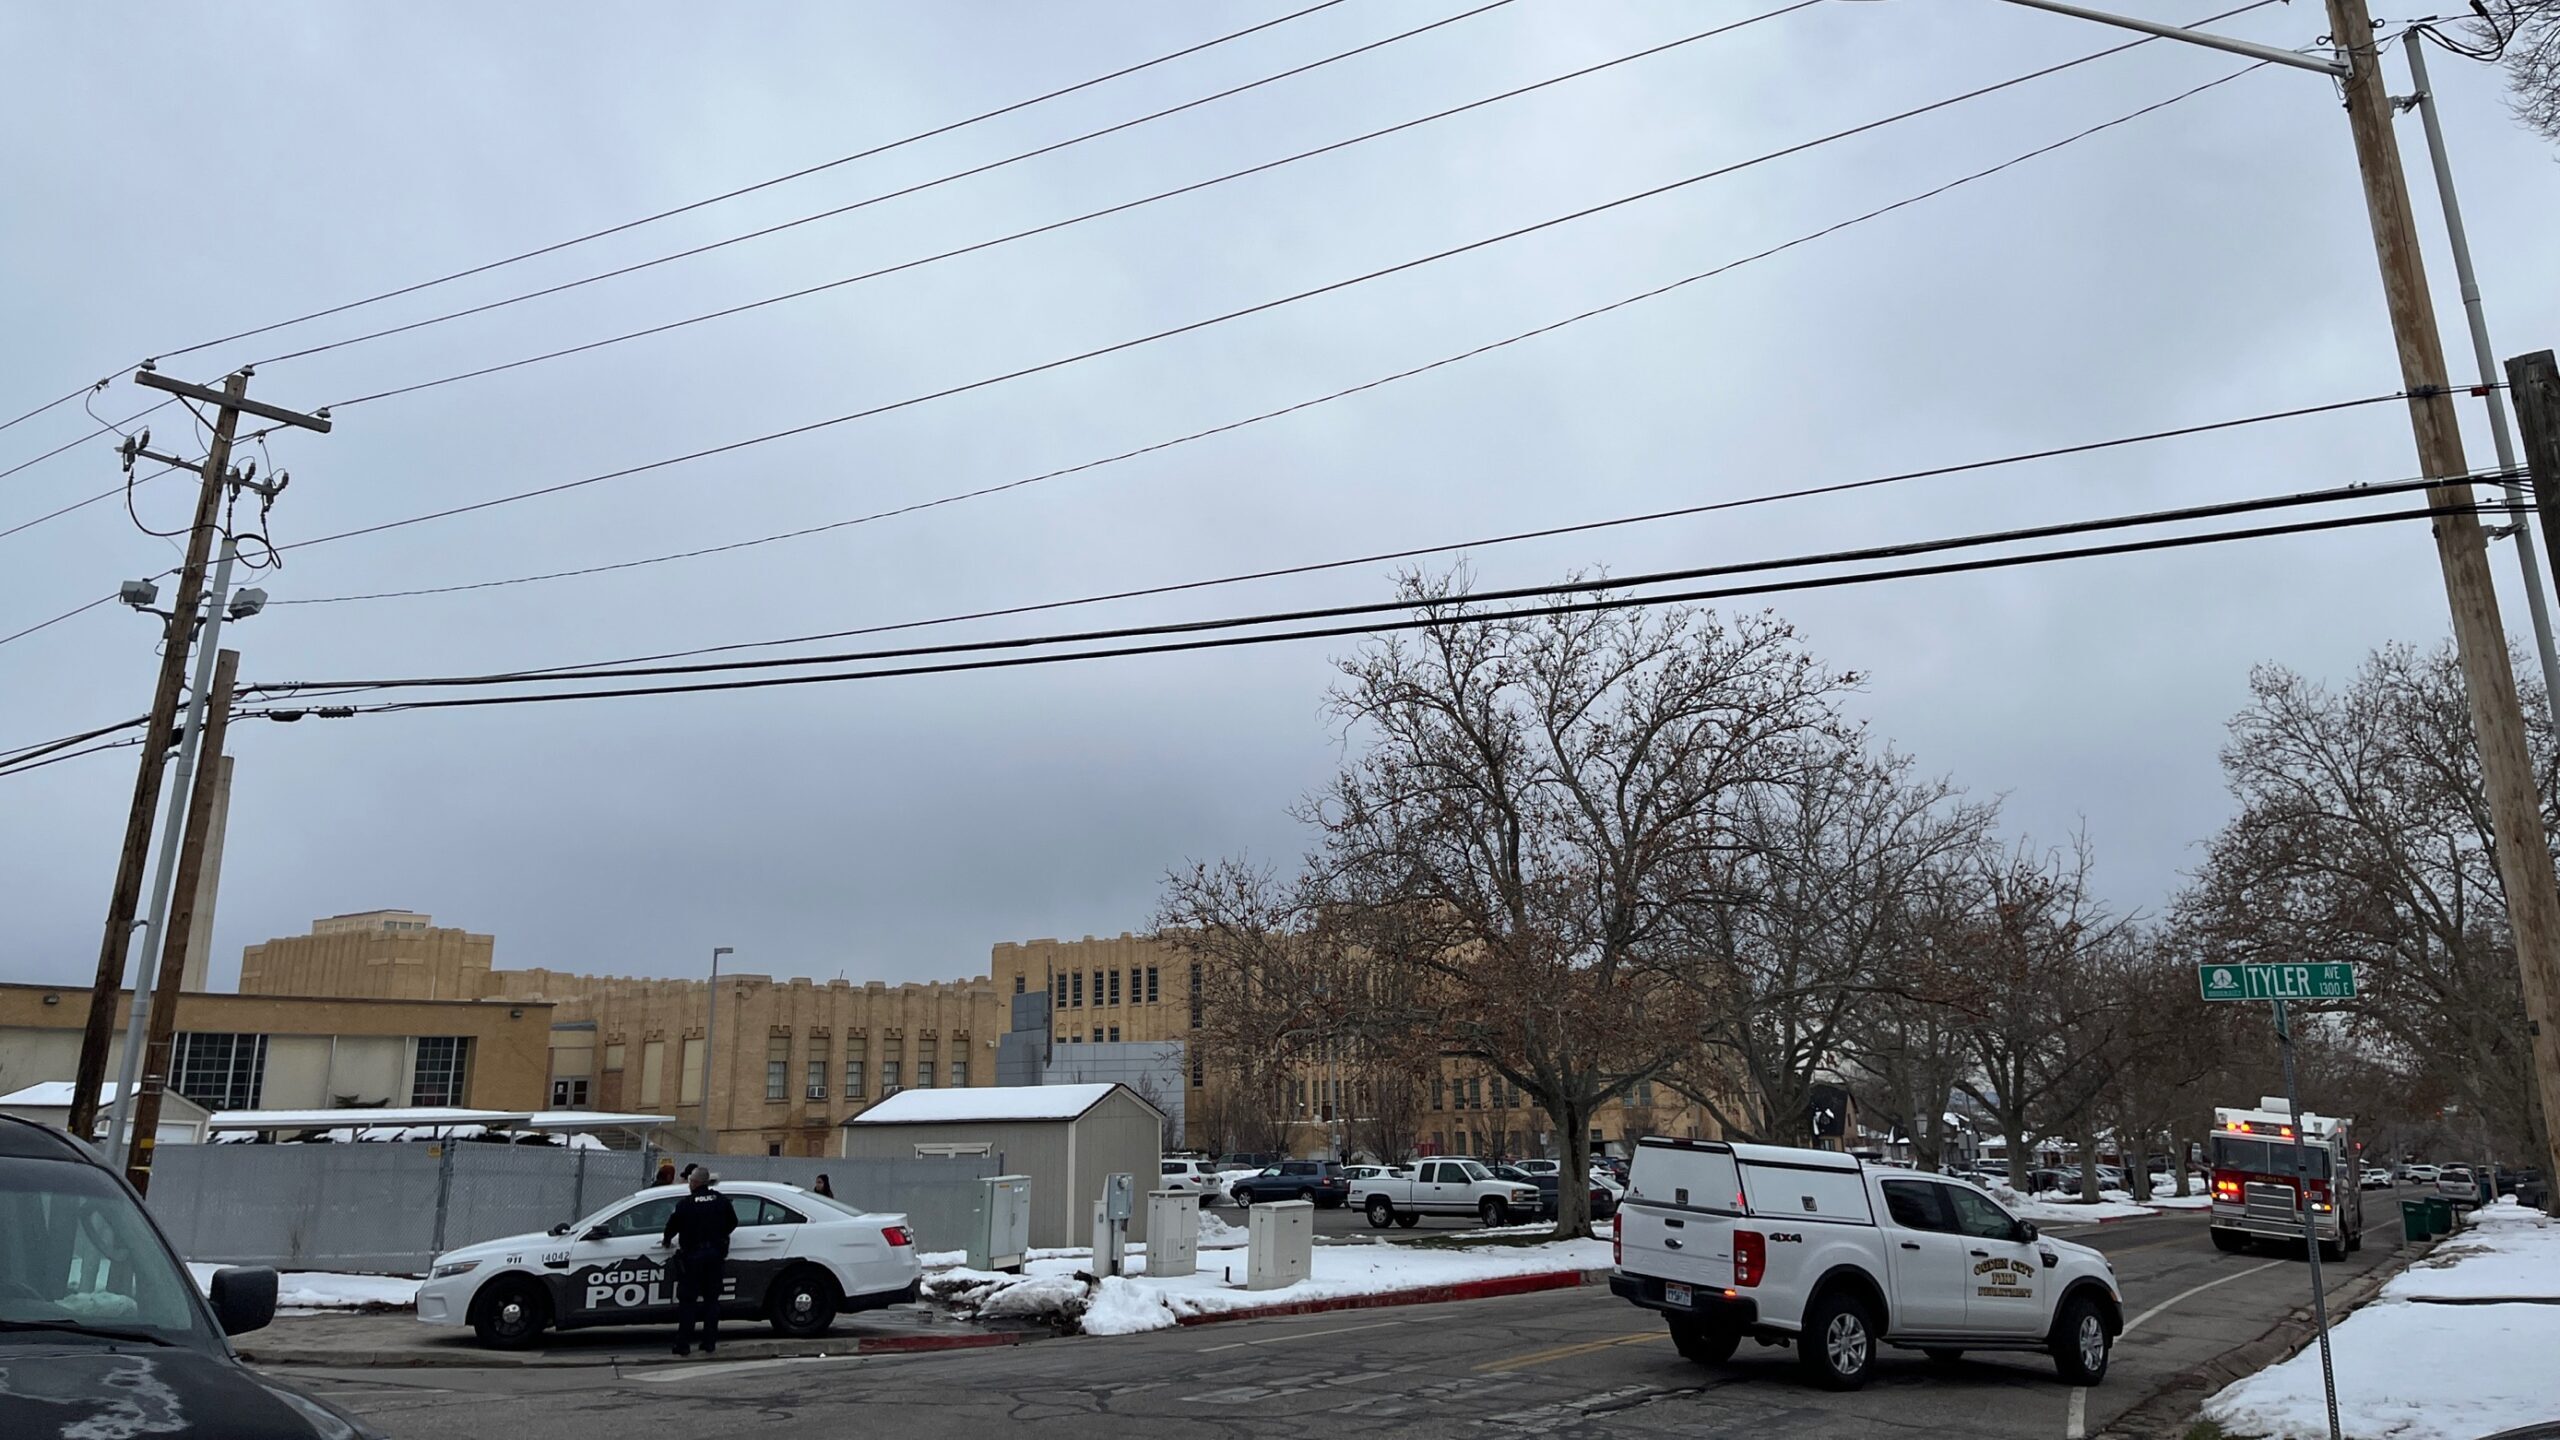 police at ogden high school pictured after utah school shooting hoax...